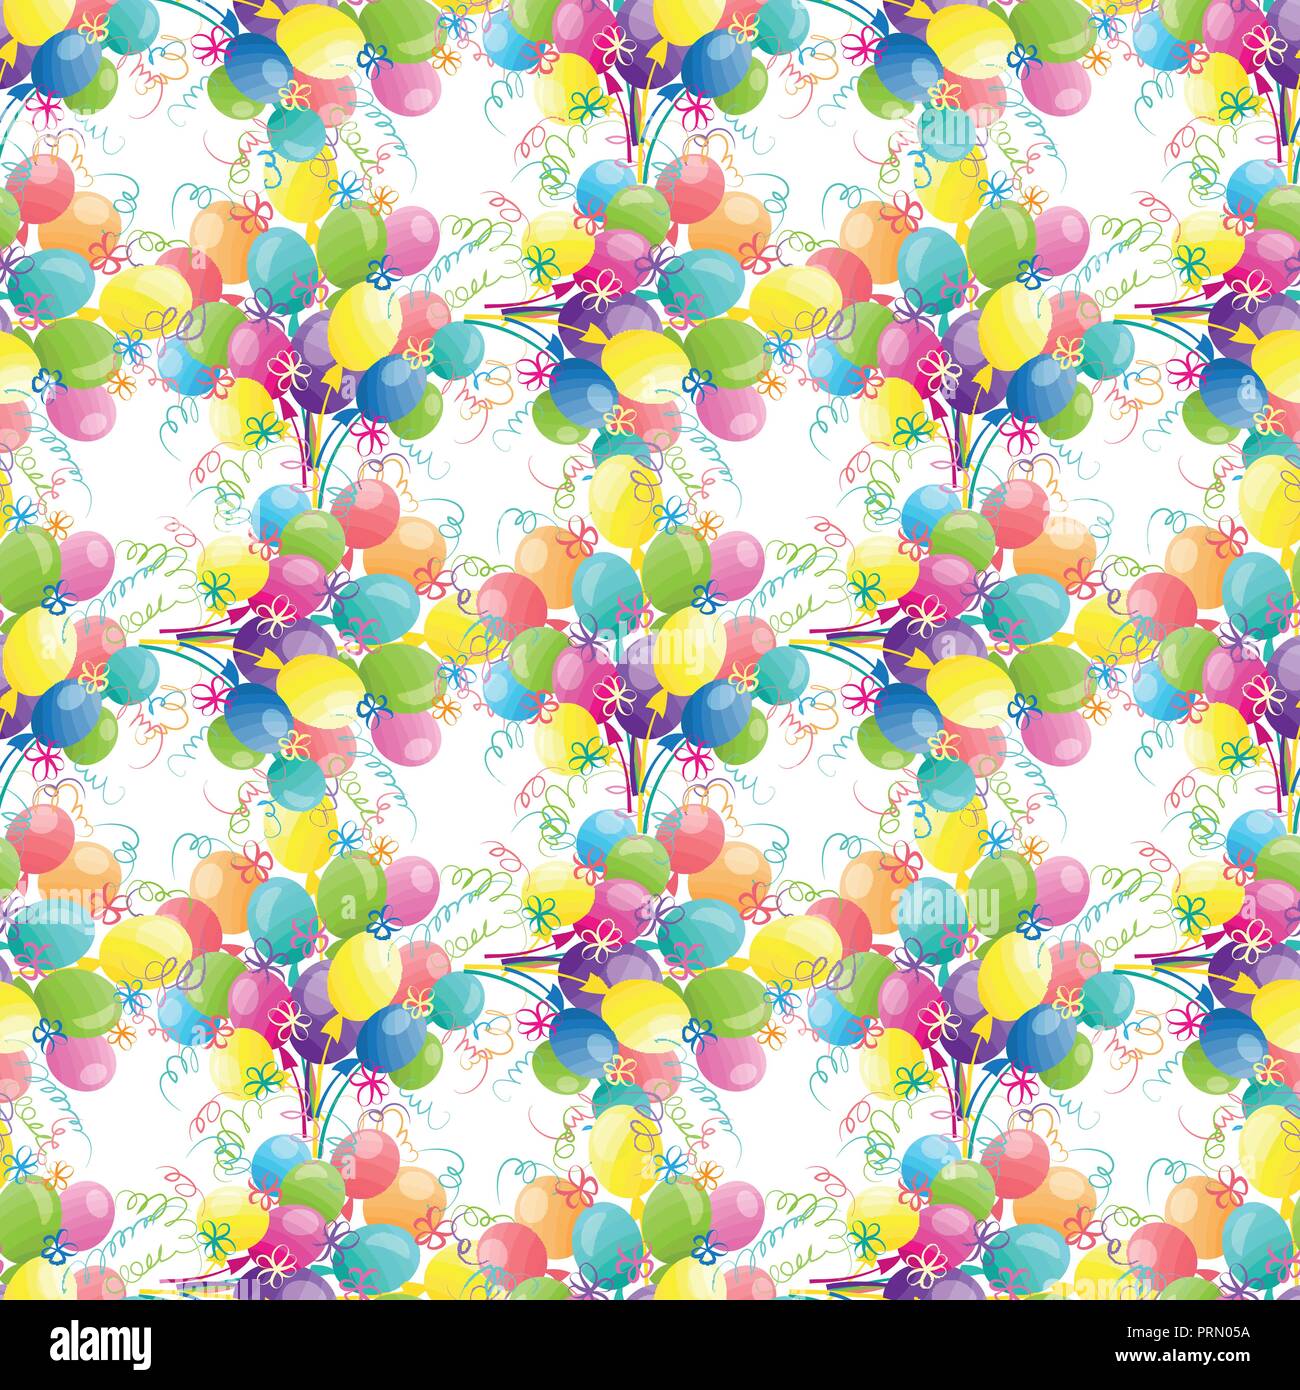 Happy Birthday Card with doodle hand drawn balloons. Vector pattern Stock Vector